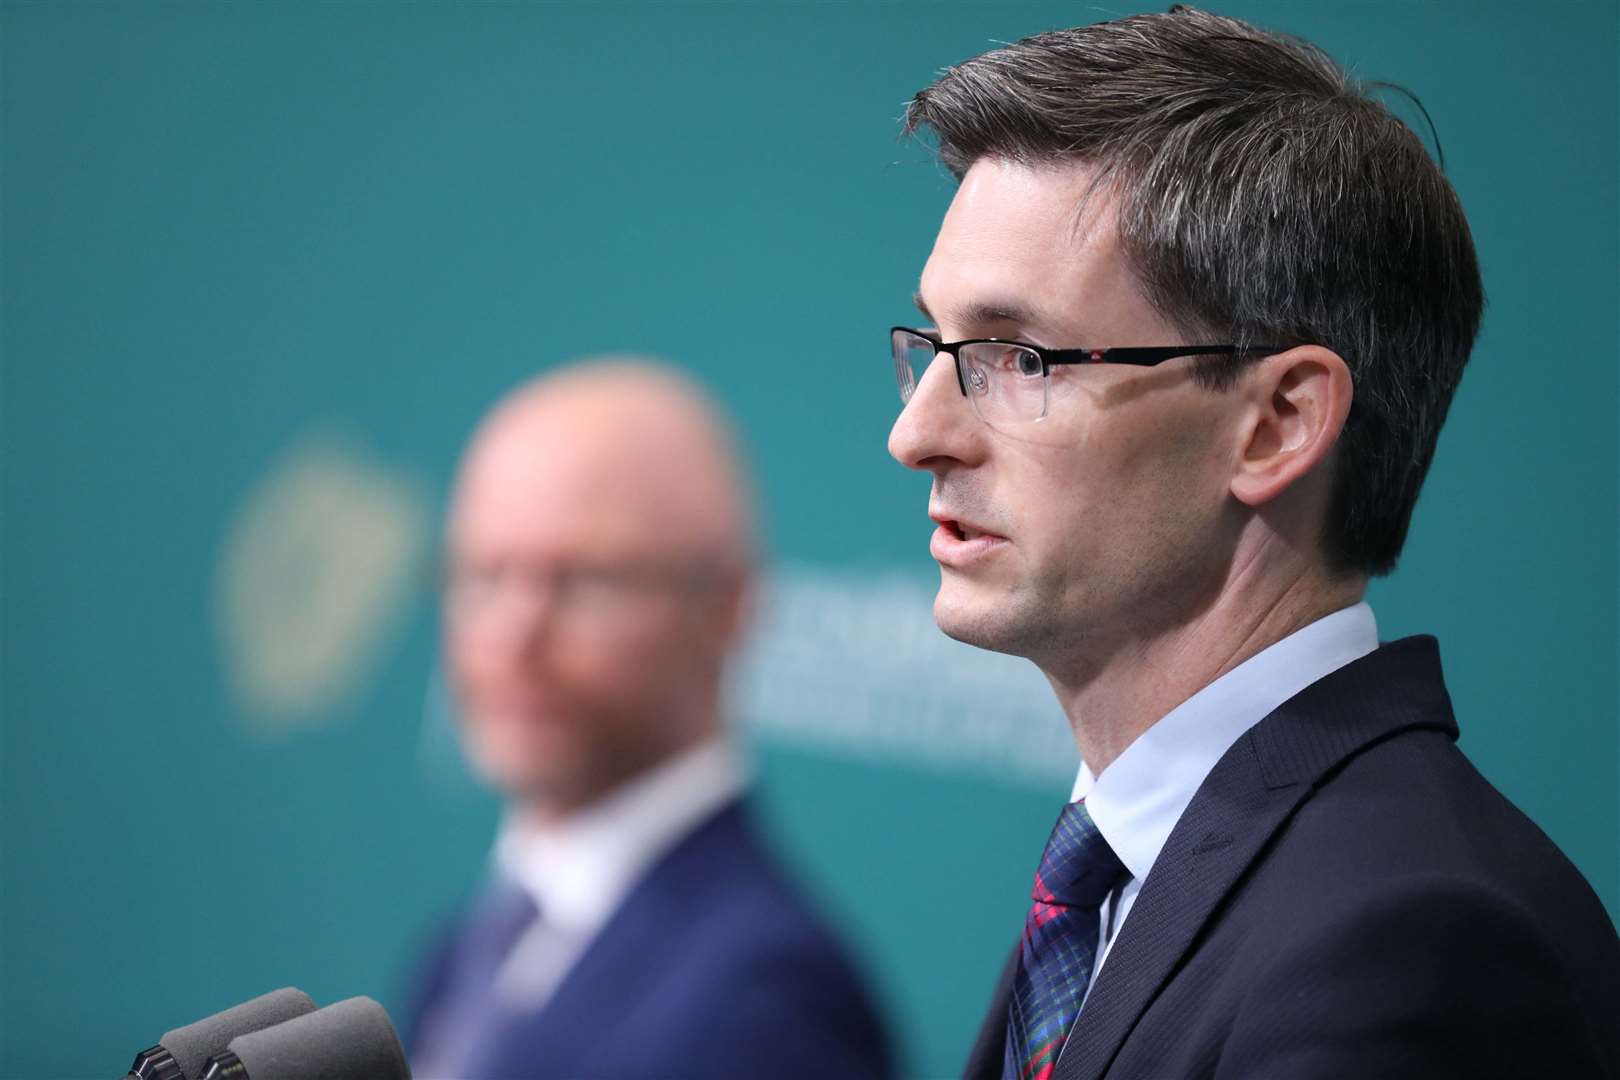 Acting chief medical officer Dr Ronan Glynn said it is “very clear” the dinner was not in line with public health guidance (Julien Behal/PA).